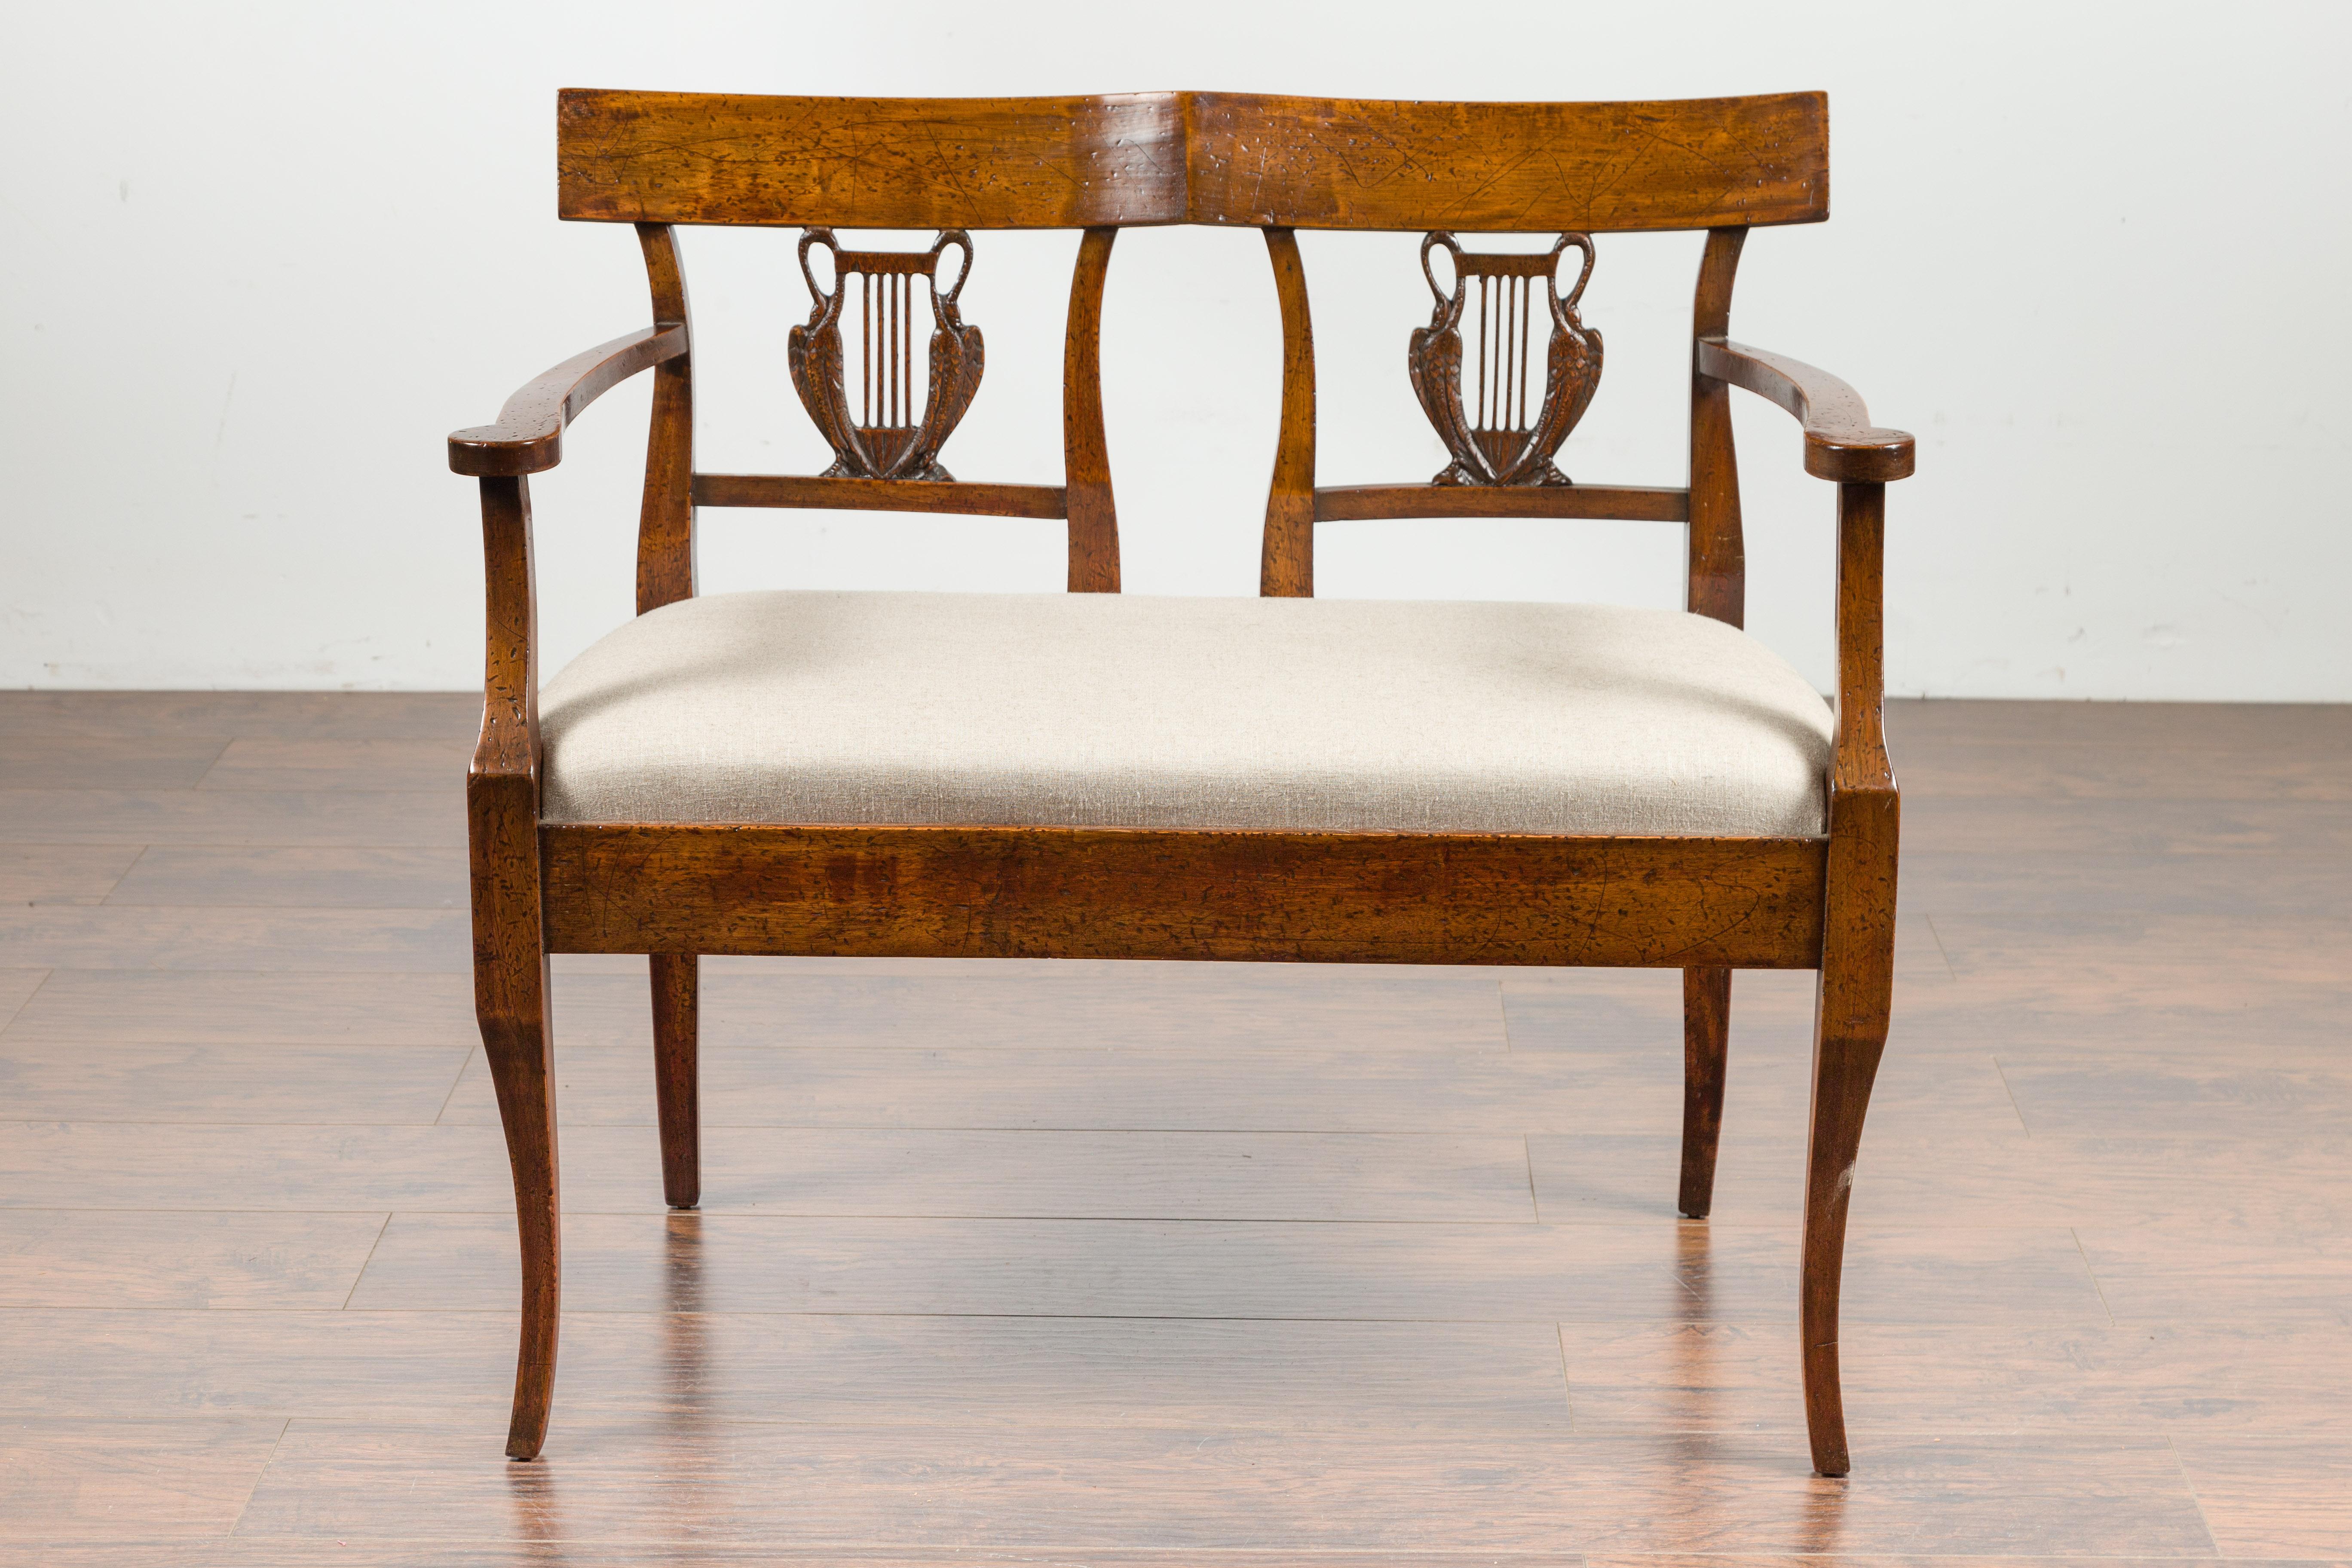 An Italian carved walnut two-seats settee from the late 19th century, with swan motifs and new upholstery. Created in Italy during the third quarter of the 19th century, this walnut settee features a sinuous back pierced with elegant swan motifs.